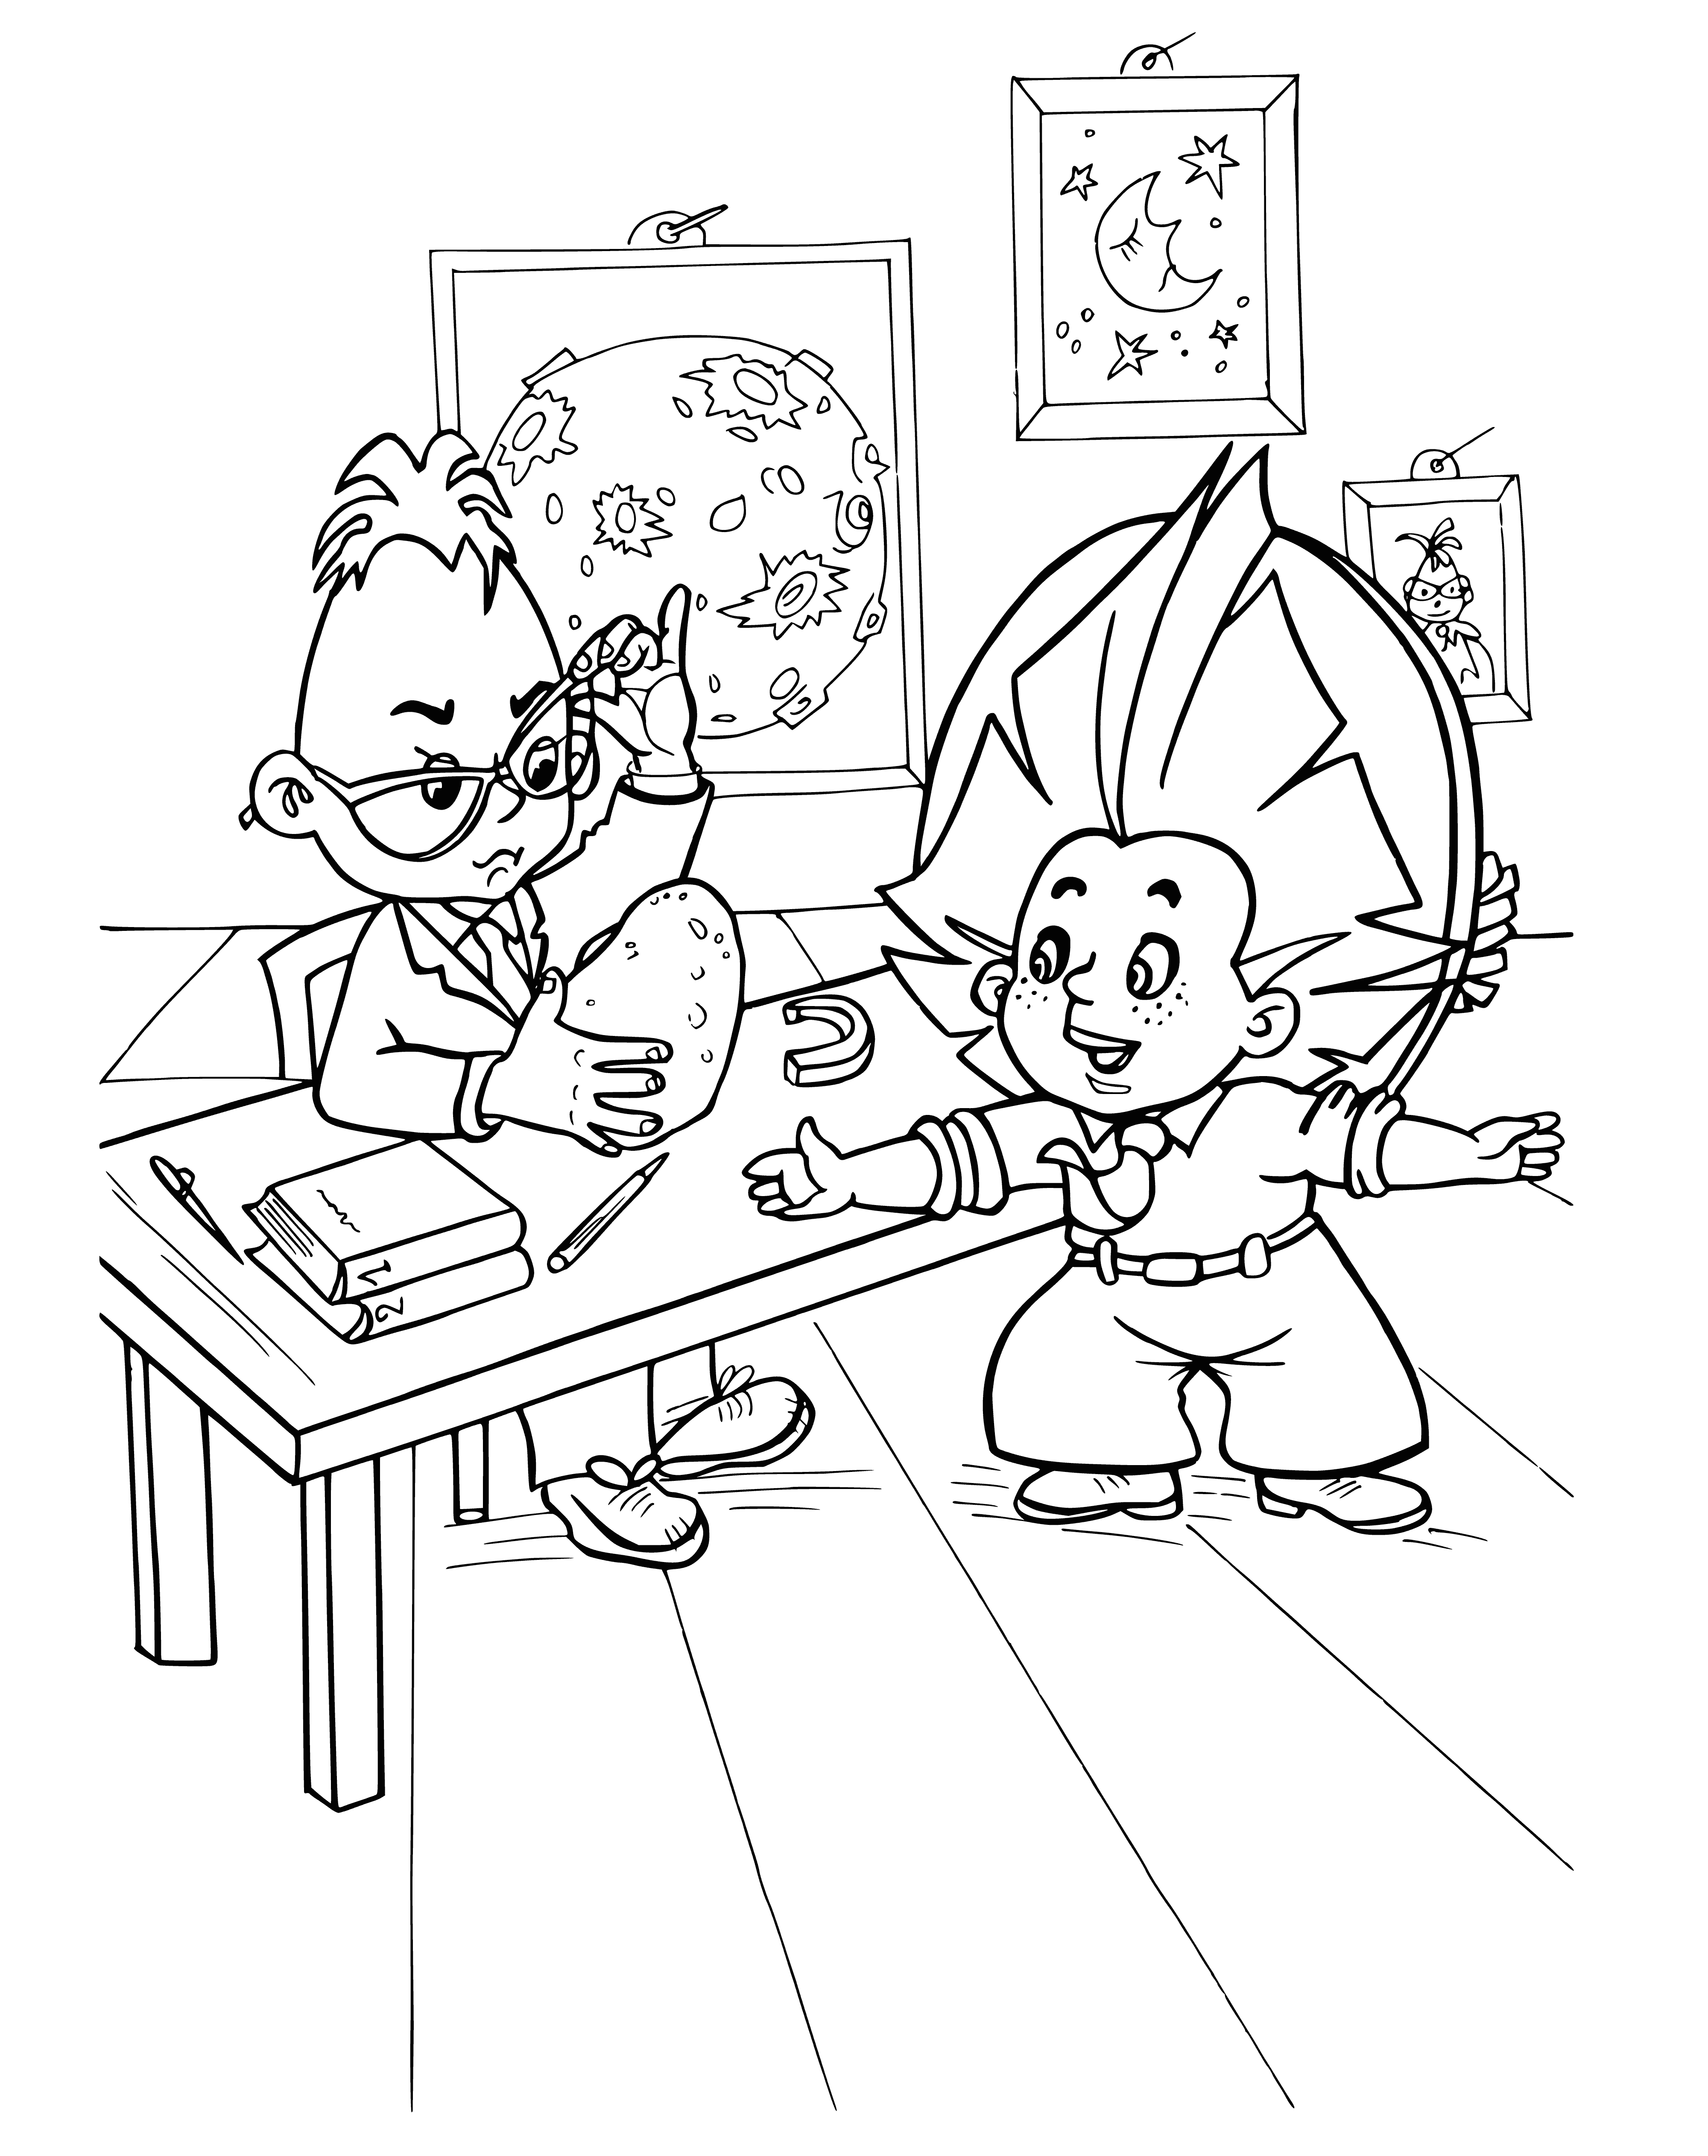 coloring page: Two friends in space suits explore a rooftop garden & moonlight. Znayka reads & Dunno gazes through a telescope.